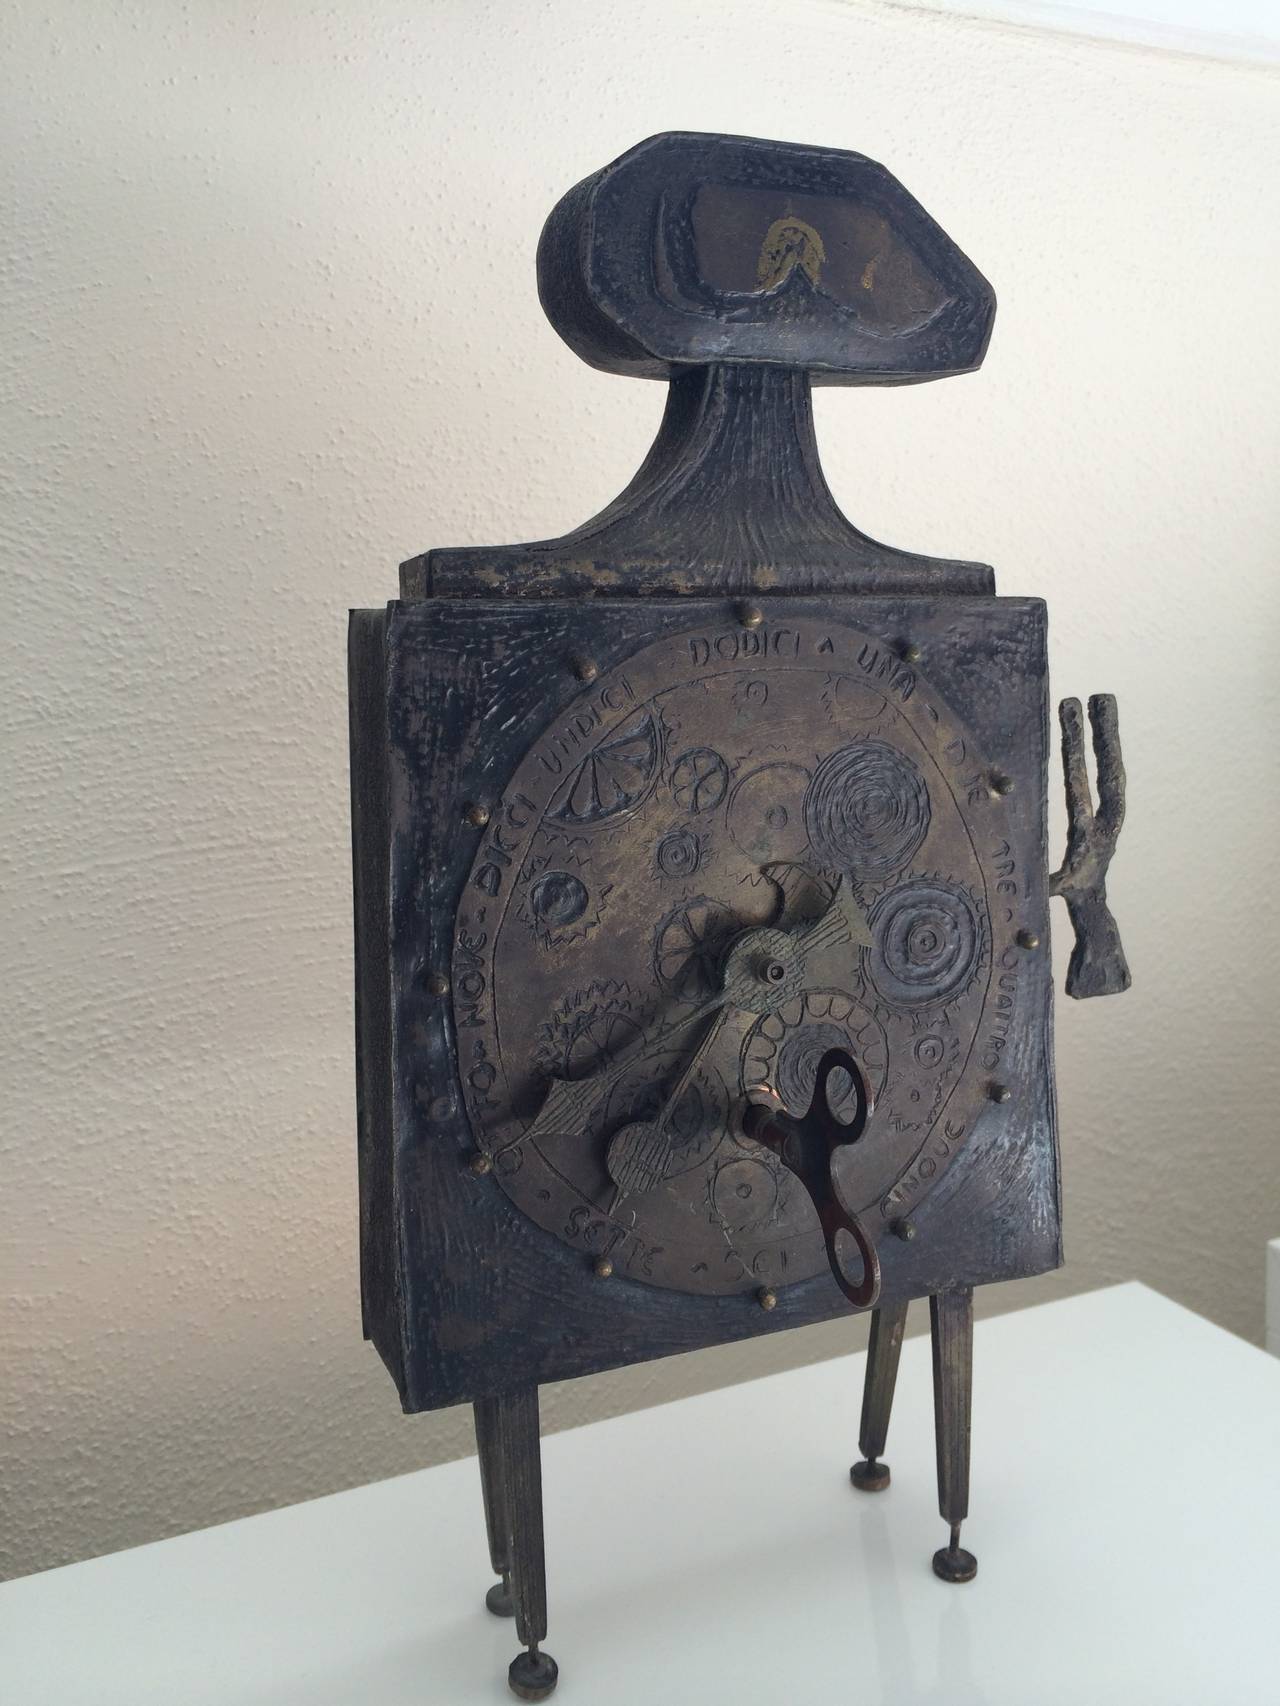 Clock sculptures were some of Lorenzo Burchiellaro’s earliest works. This figural bronze sculpture features an abstract design with stylized clock face, raised on four bent legs. This particular piece resembles the work of Modern British artist,